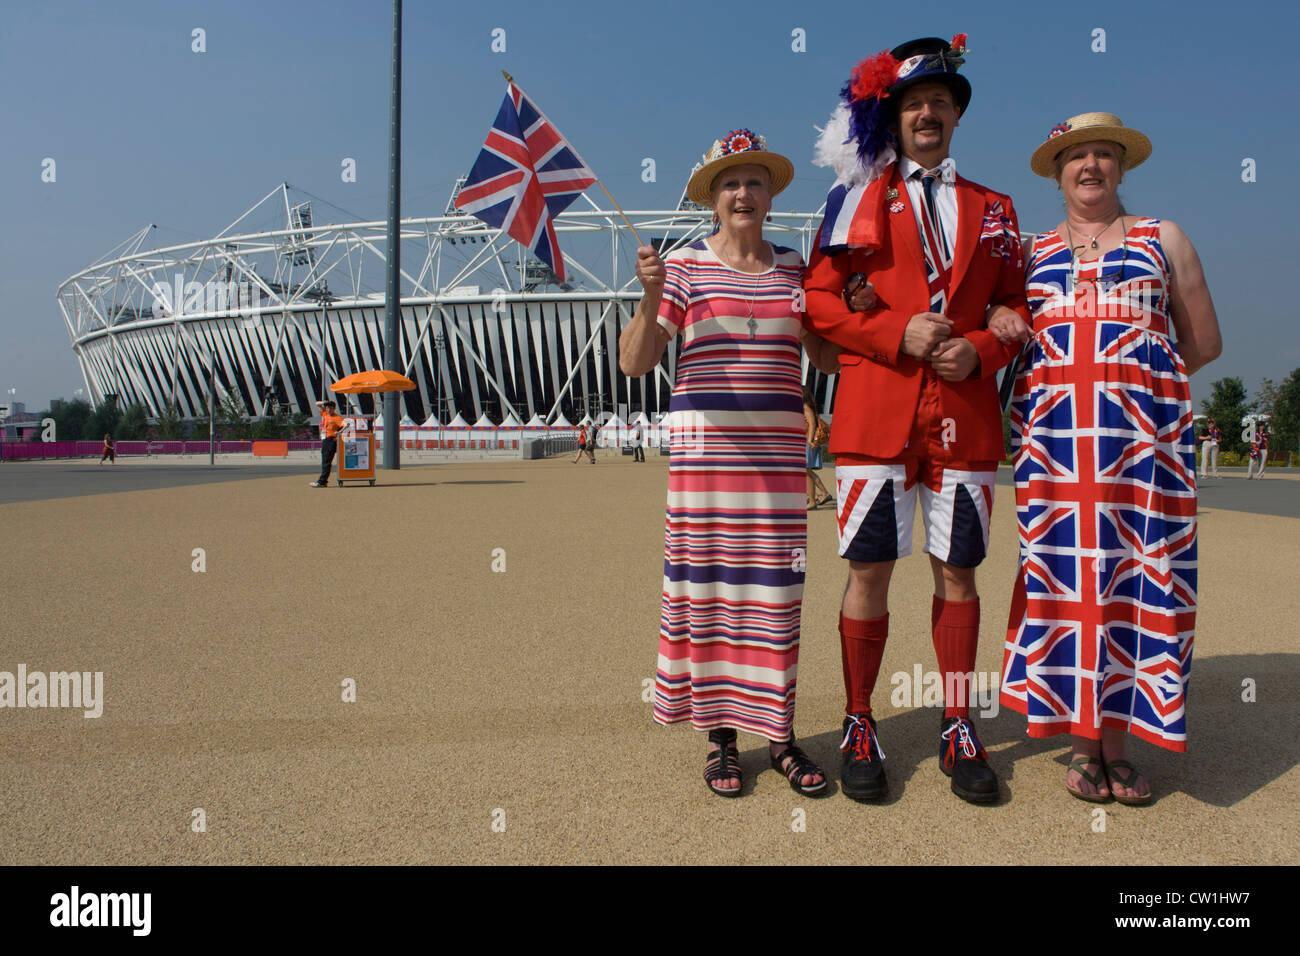 A tall son in the middle accompanies his mother (l) and sister (r) in the Olympic Park during the London 2012 Olympics. Wearing Union Jack designs dresses and shorts plus a tie and flag to wave, the trio stand in front of the main Olympic stadium before the large crowds arrive later in the day. They have tickets to watch the Hockey and stand smiling as eccentric Brits wearing their national colours. Stock Photo